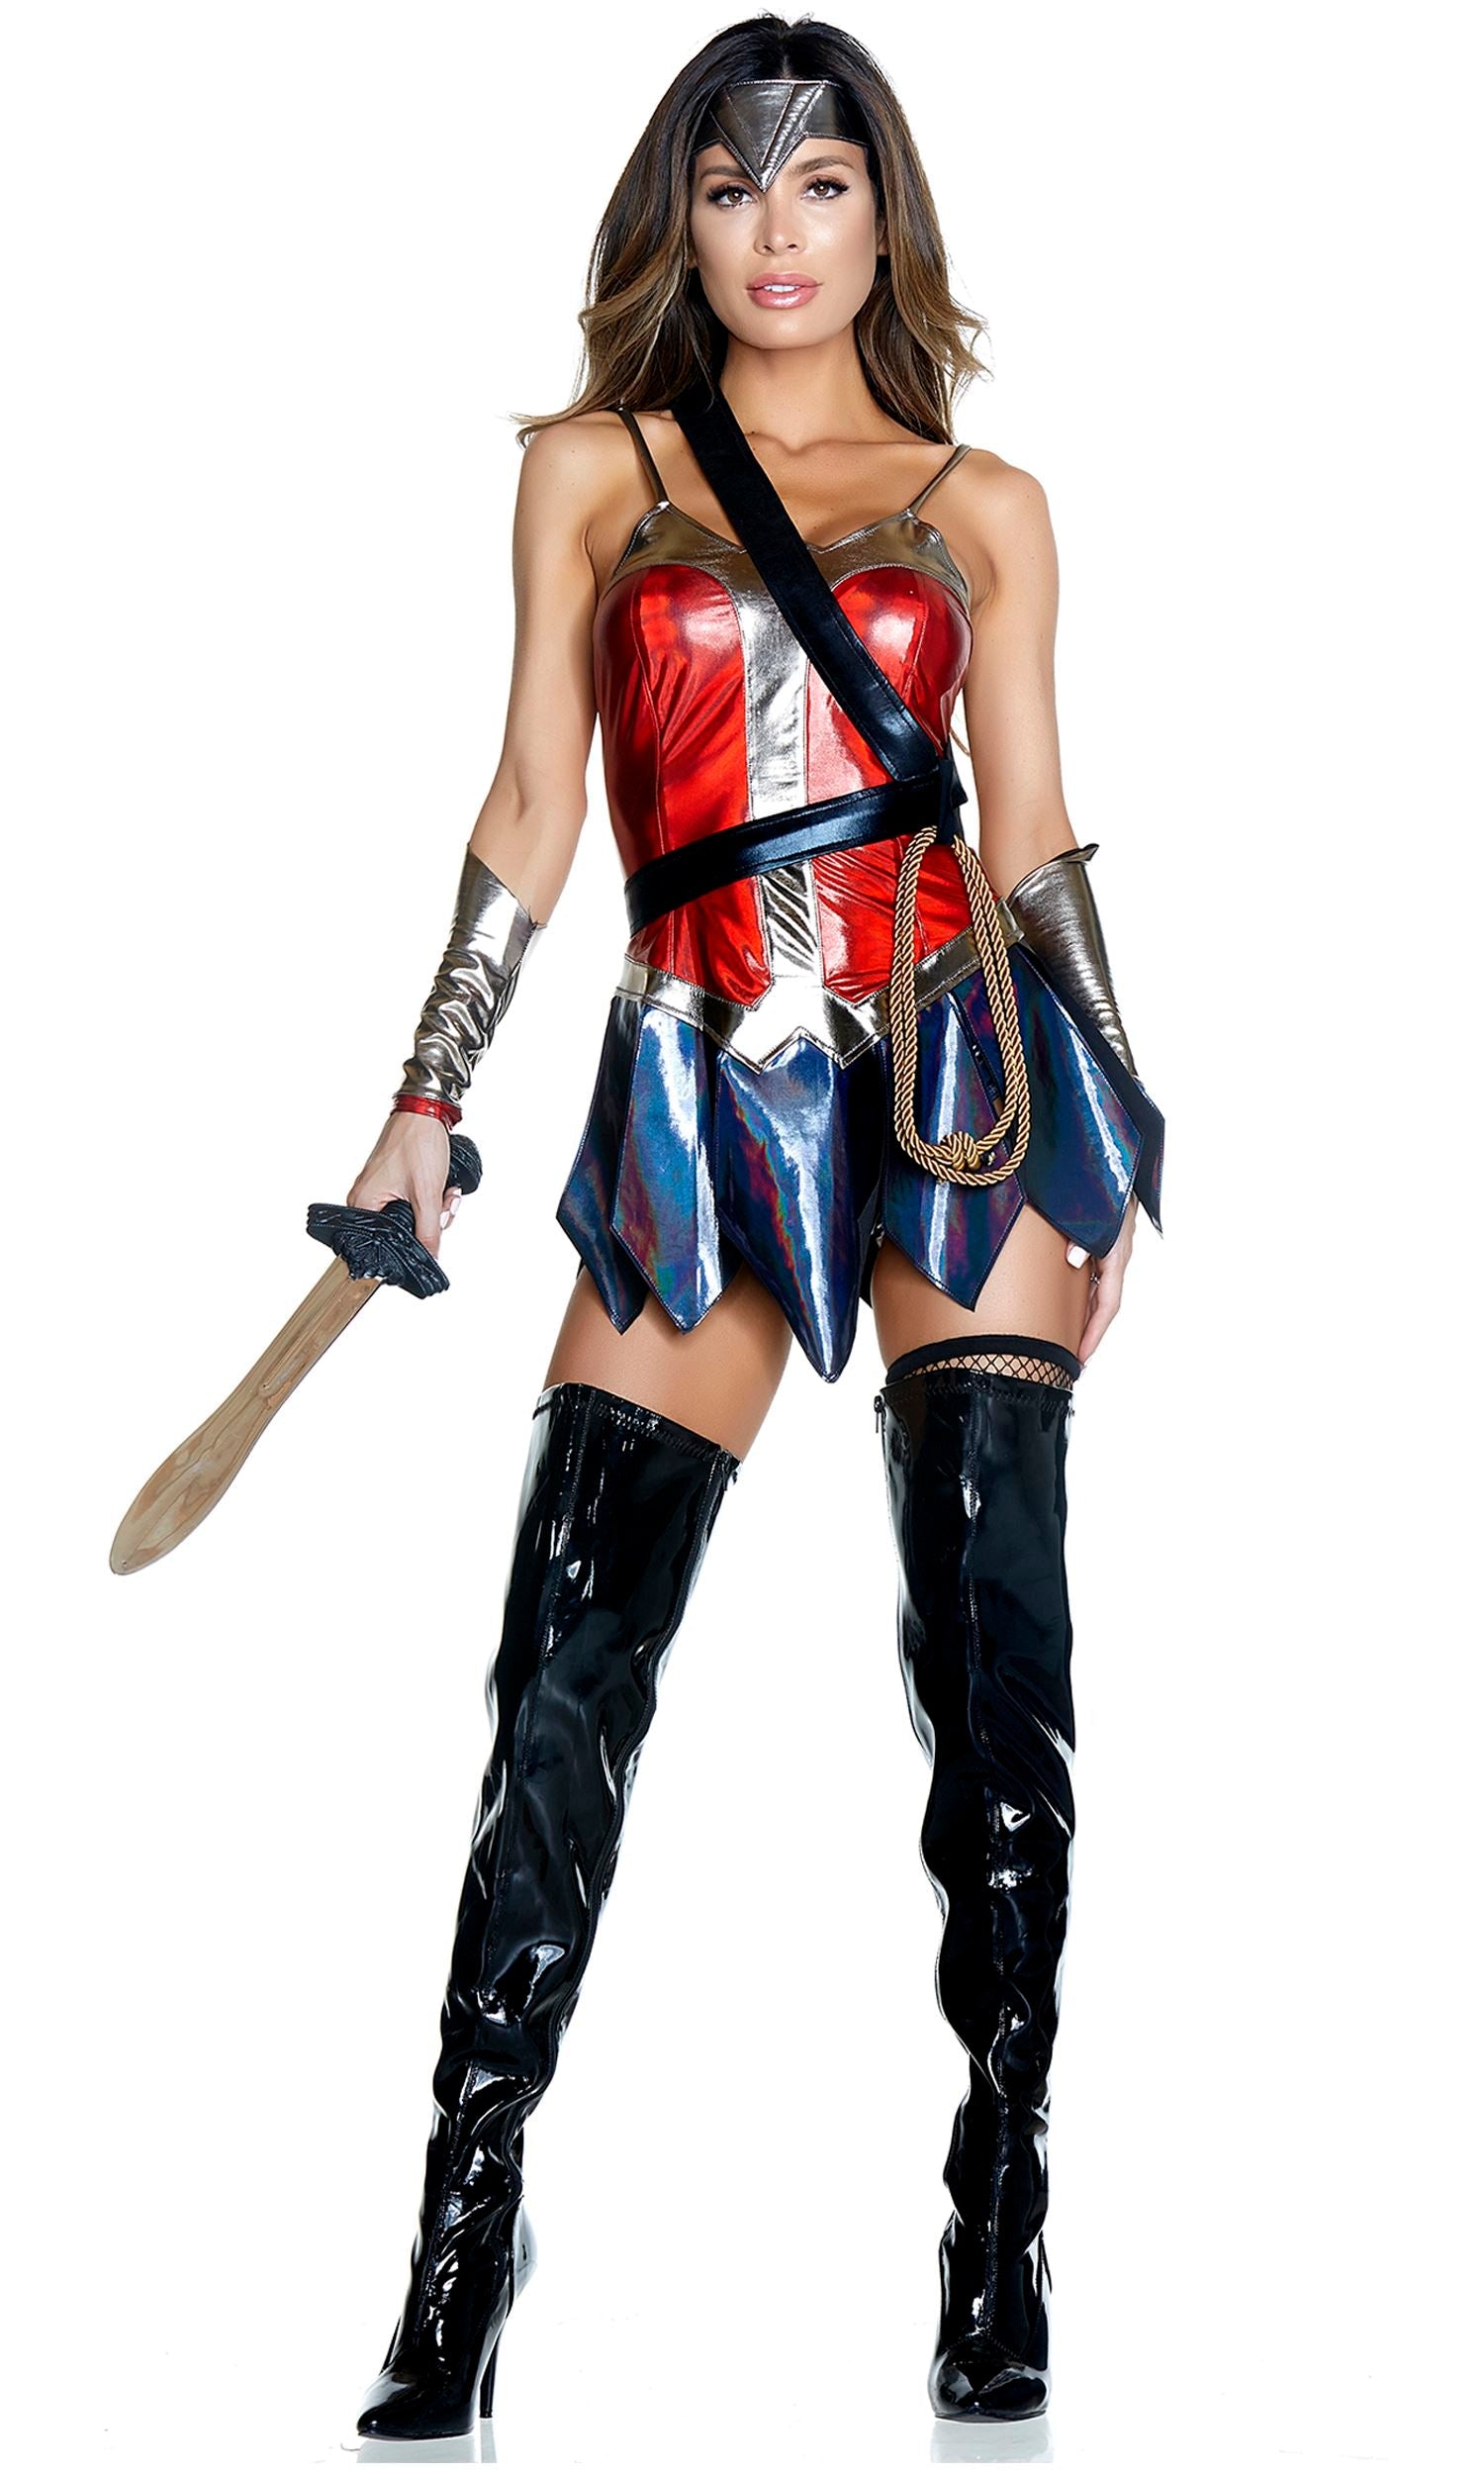 Comic Wonder Heroine Woman Costume by Forplay Costumes only at  Tdcostumes.com